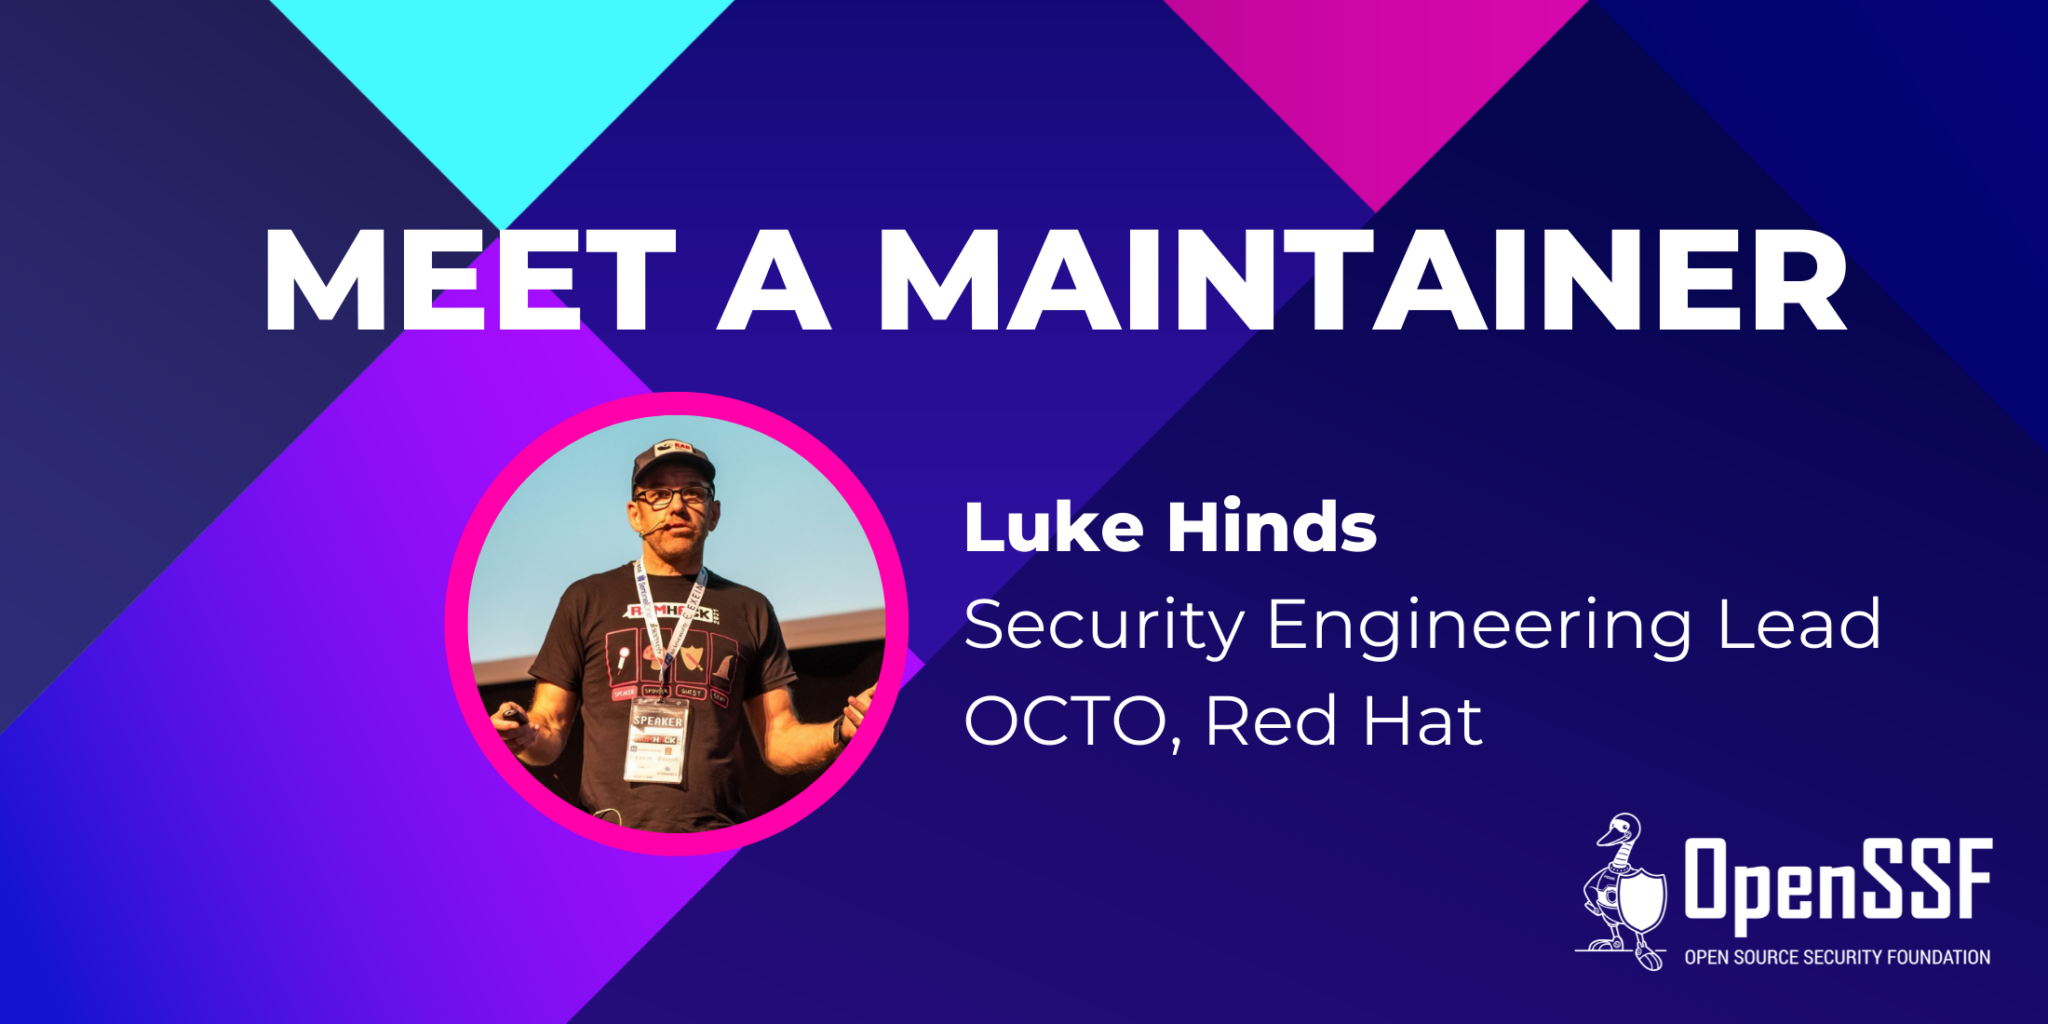 Luke Hinds Security Engineering Lead OCTO Red Hat Meet a Maintainer